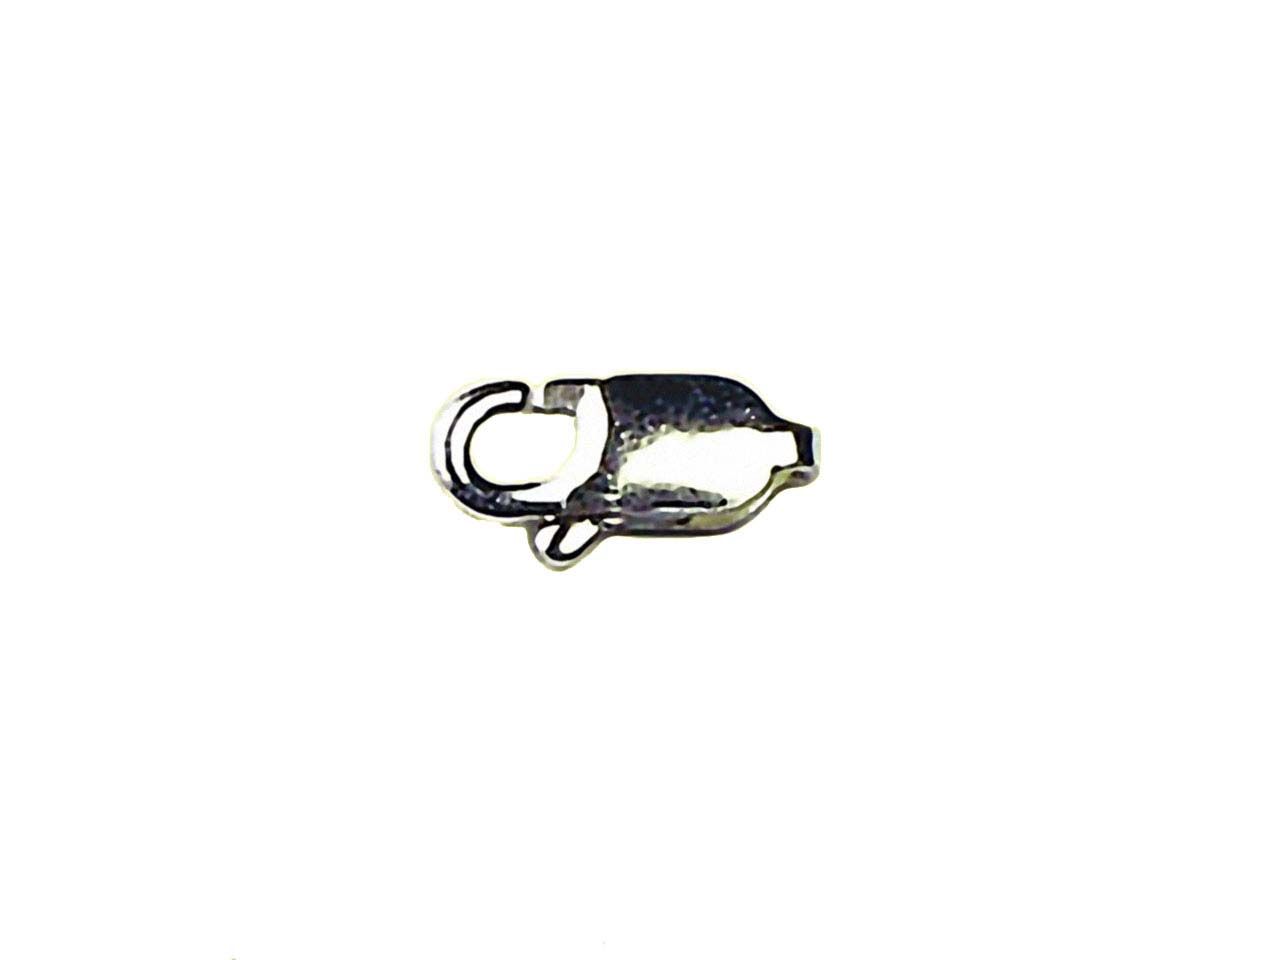 Bead Landing Lobster Claw Clasps - Oxidized Silver - 10 ct